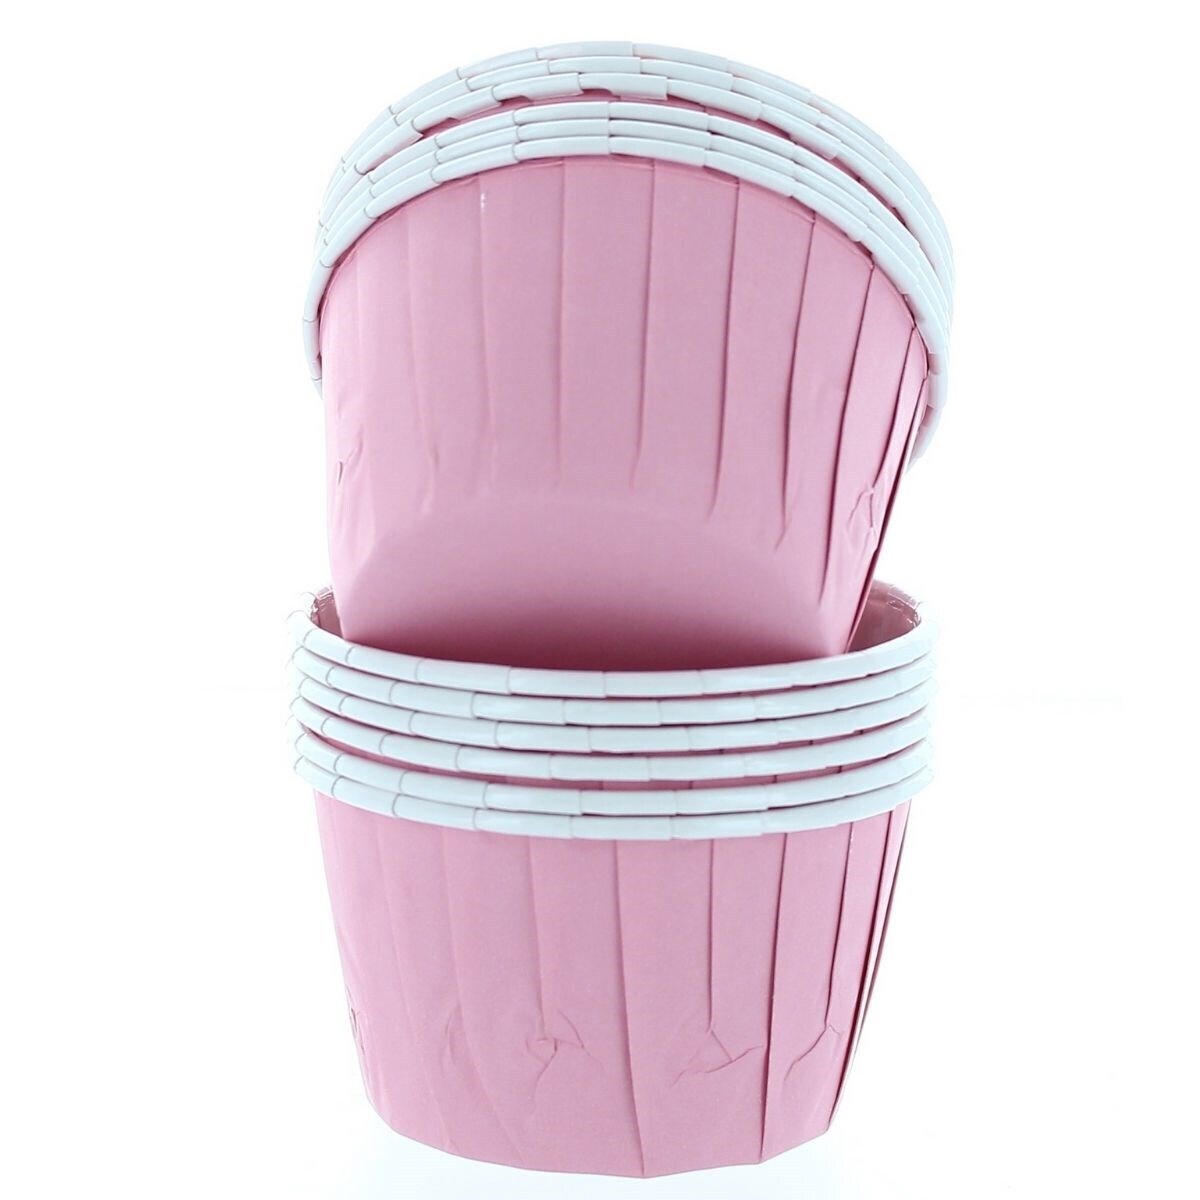 Baked With Love Baking Cups -PINK -Κυπελάκια Ψησίματος 5εκ -Ροζ 12 τεμ